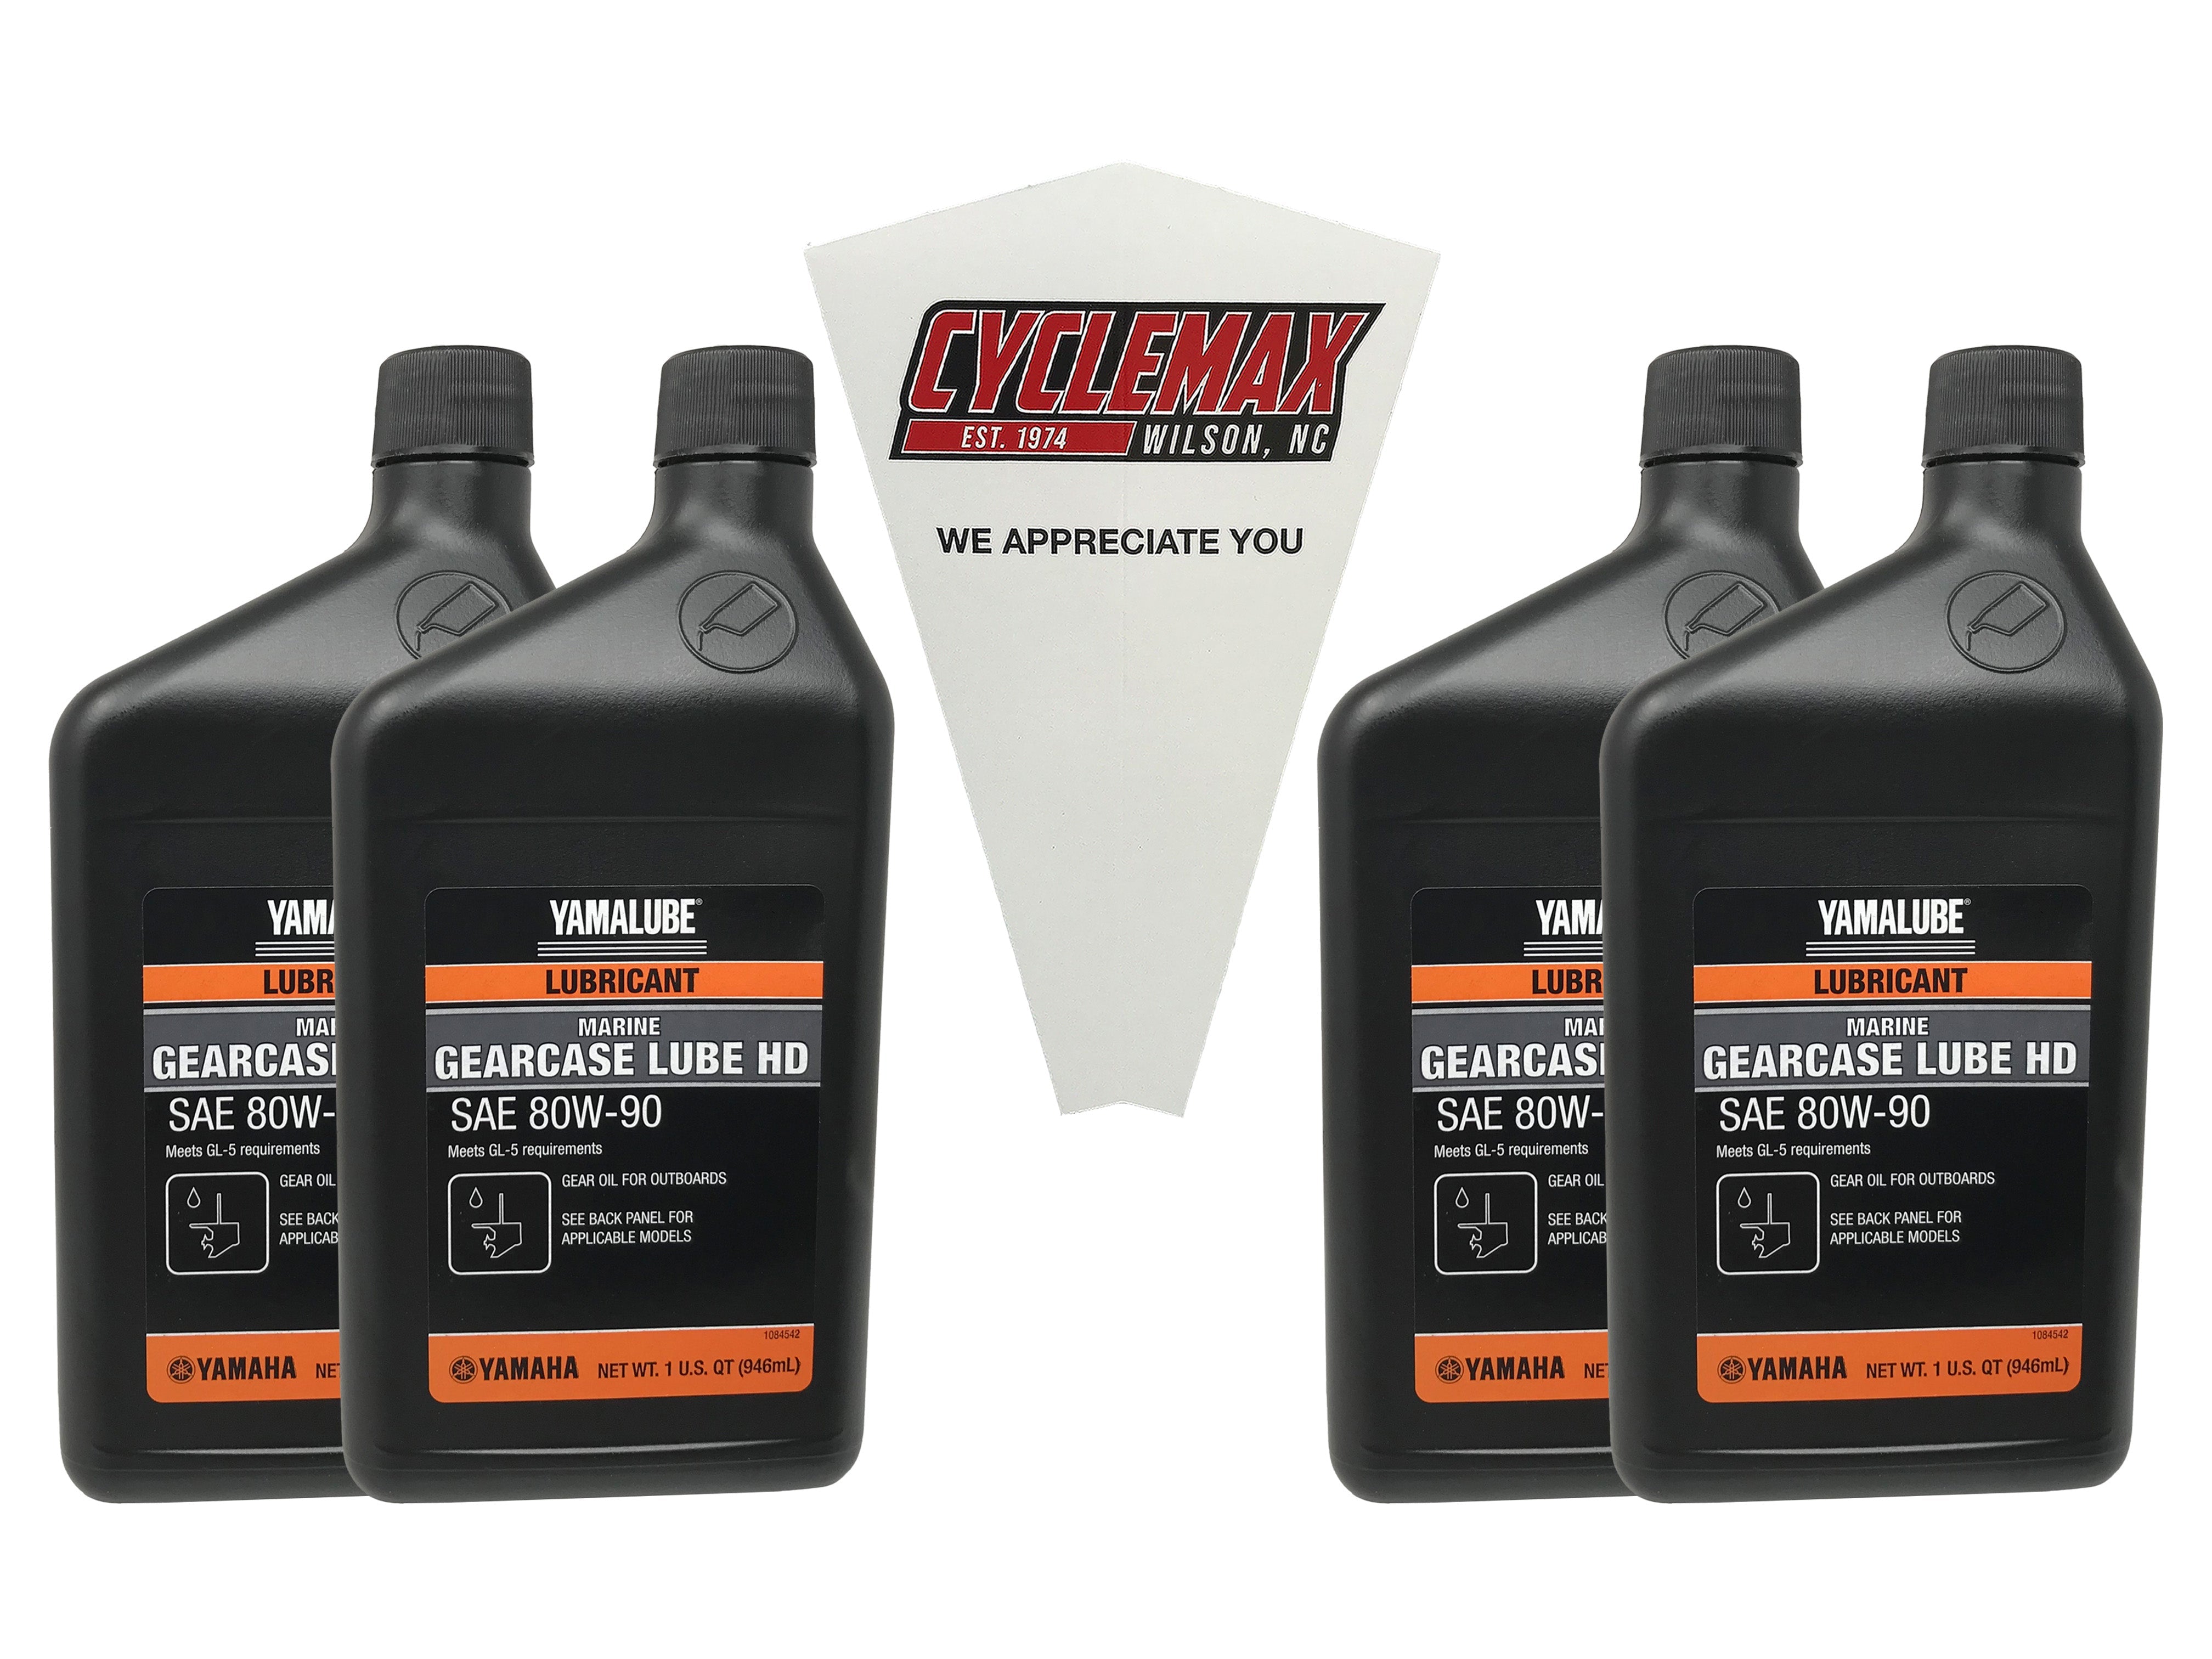 CYCLEMAX Four Pack for Yamaha Gearcase Lube HD Acc-GLUBE-HD-QT Contains Four Quarts and a Funnel